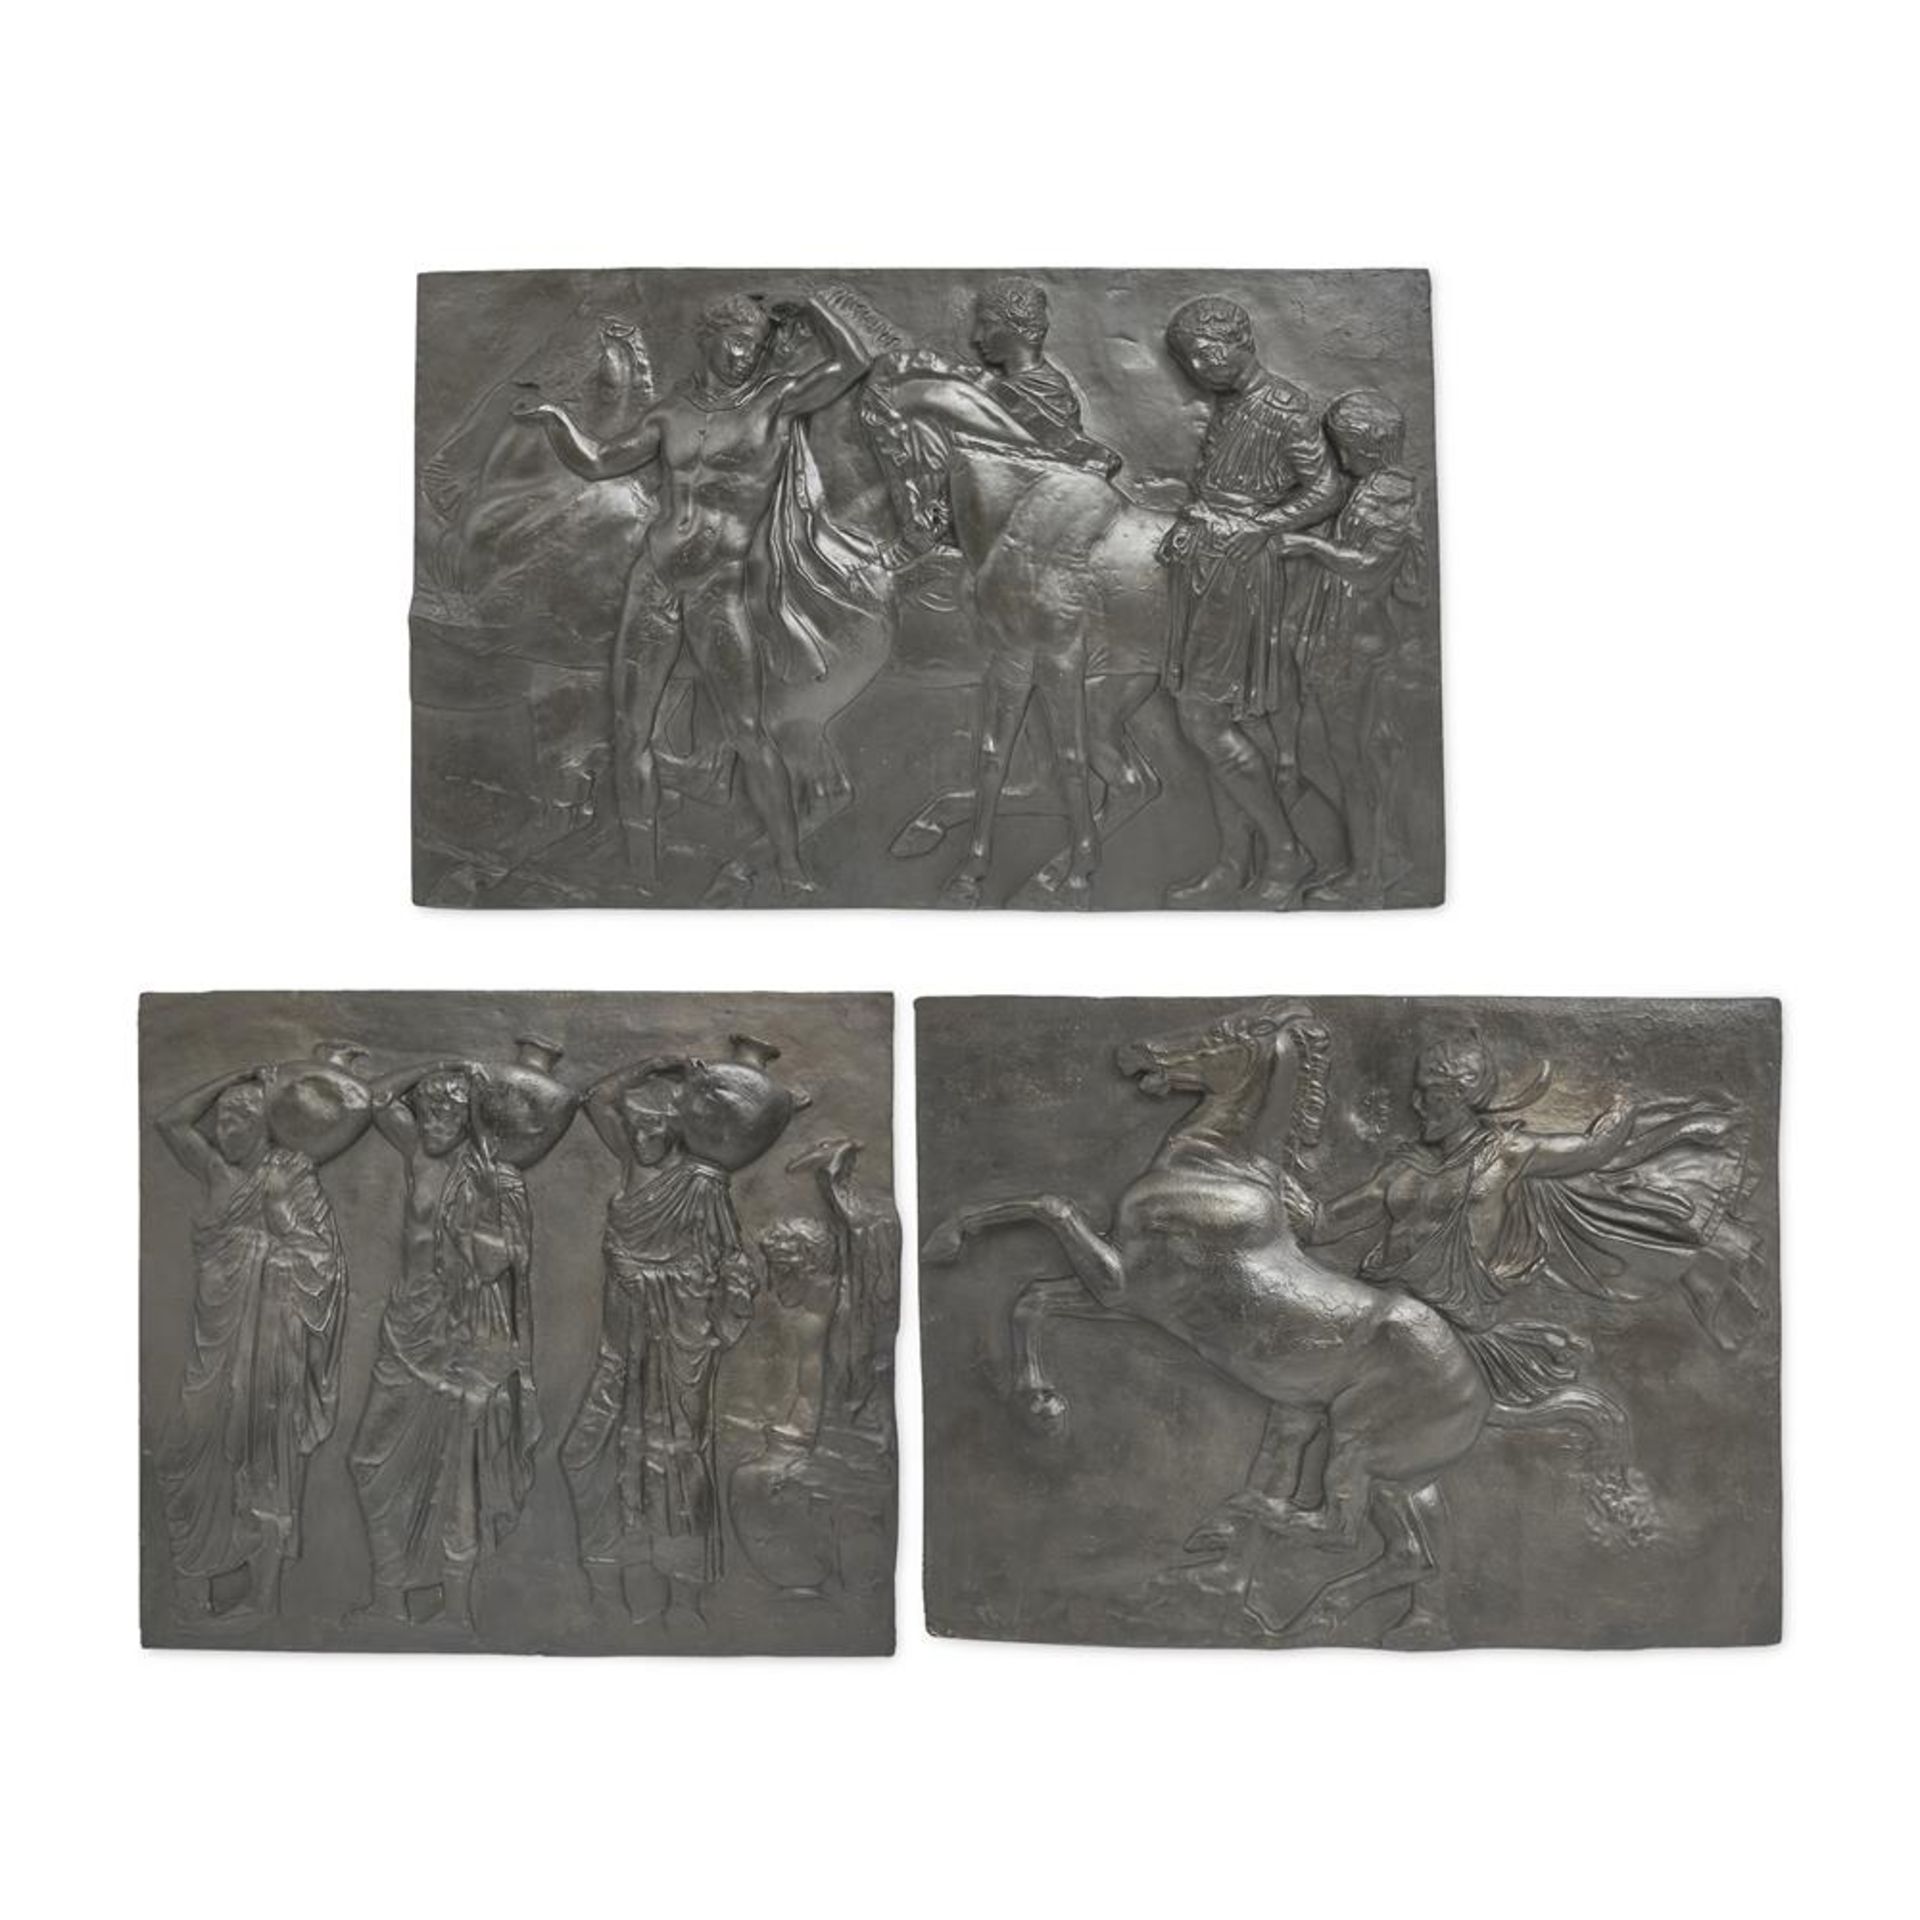 A SET OF THREE LARGE PLASTER RELIEFS OF CLASSICAL SCENES, 19TH CENTURY FRENCH OR BELGIAN